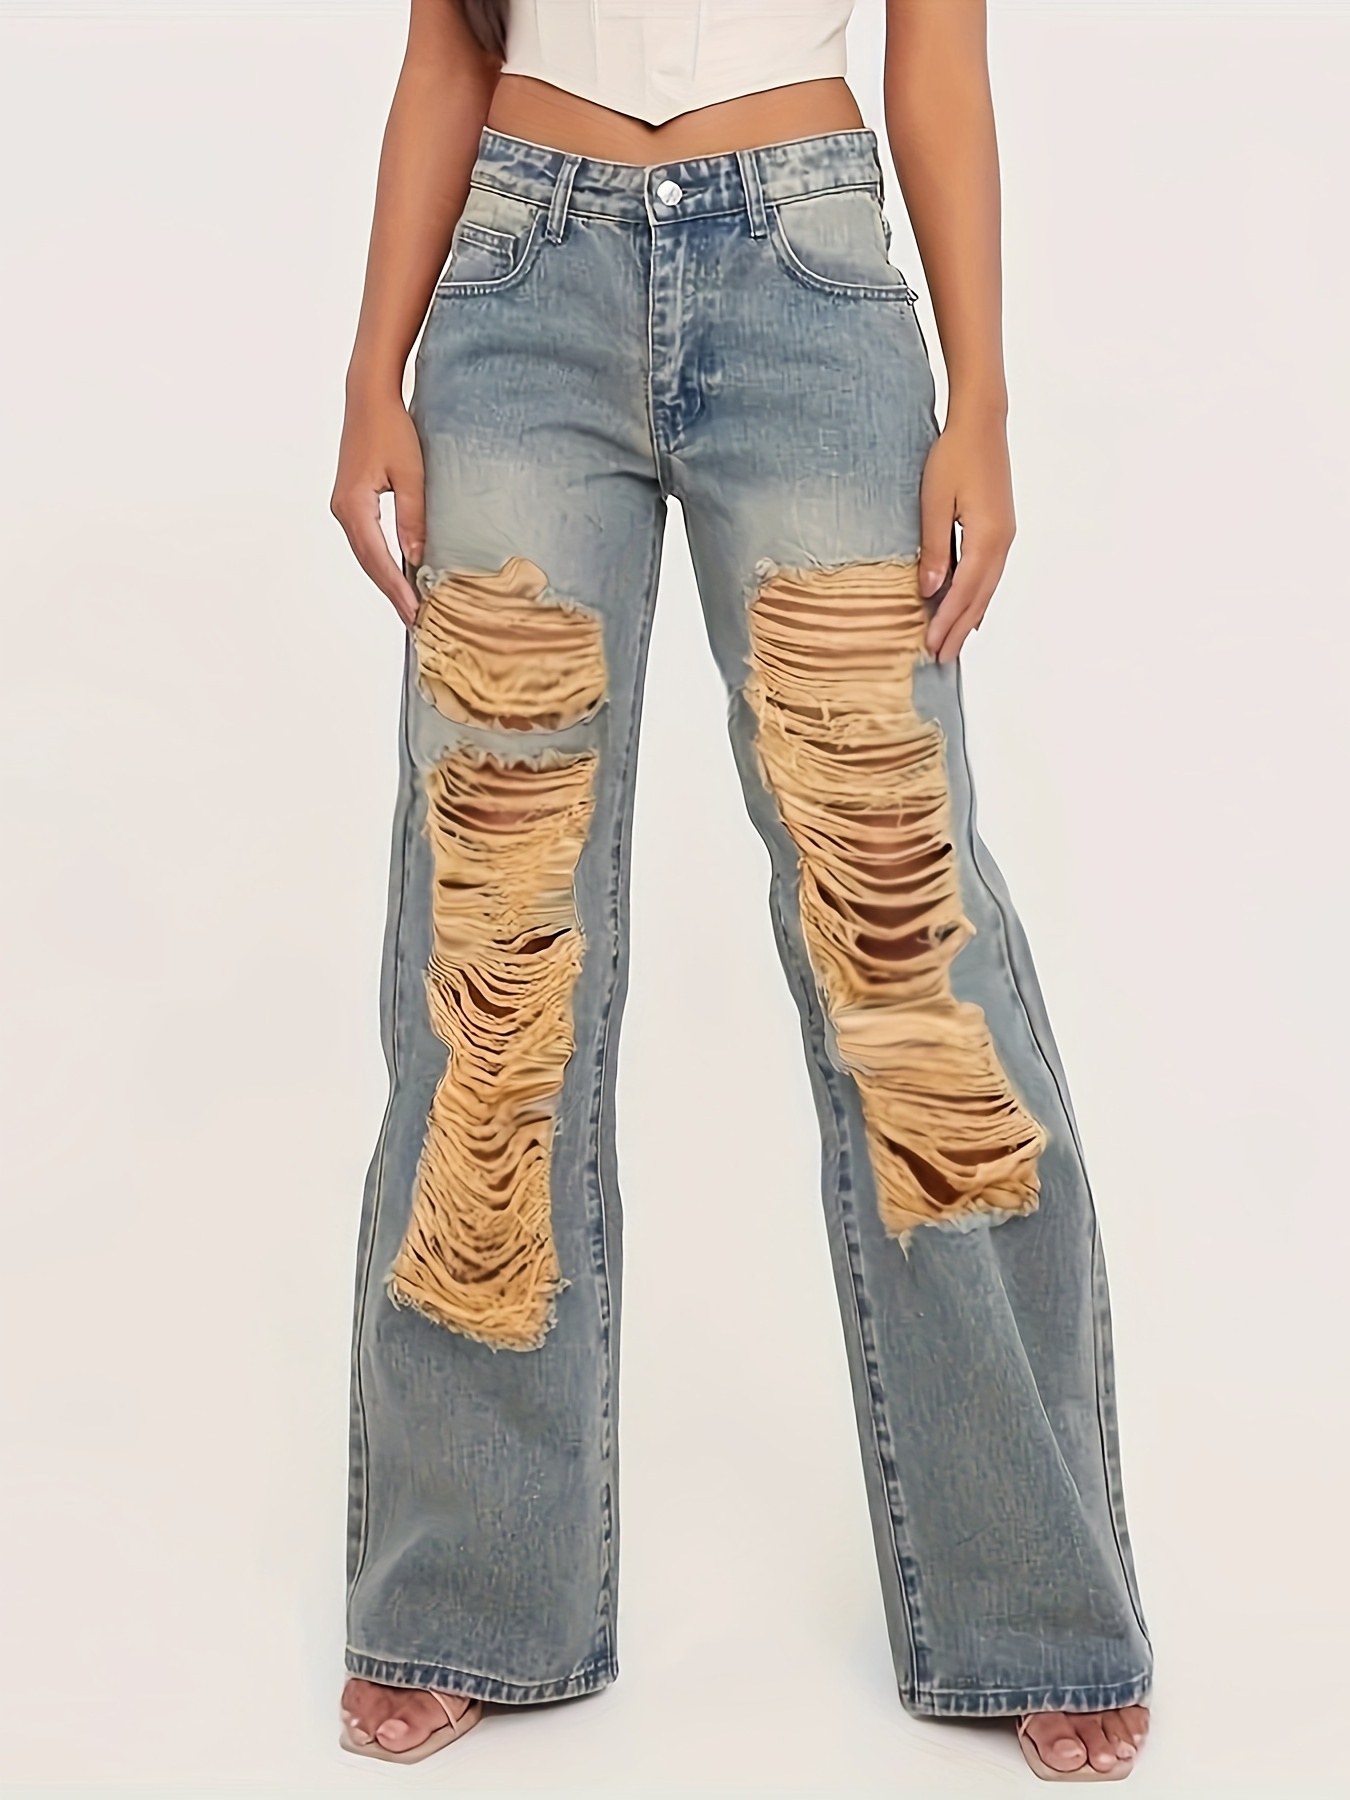 Ripped Holes Retro Style Baggy Jeans, Loose Fit Non-Stretch Wide Legs  Jeans, Women's Denim Jeans & Clothing